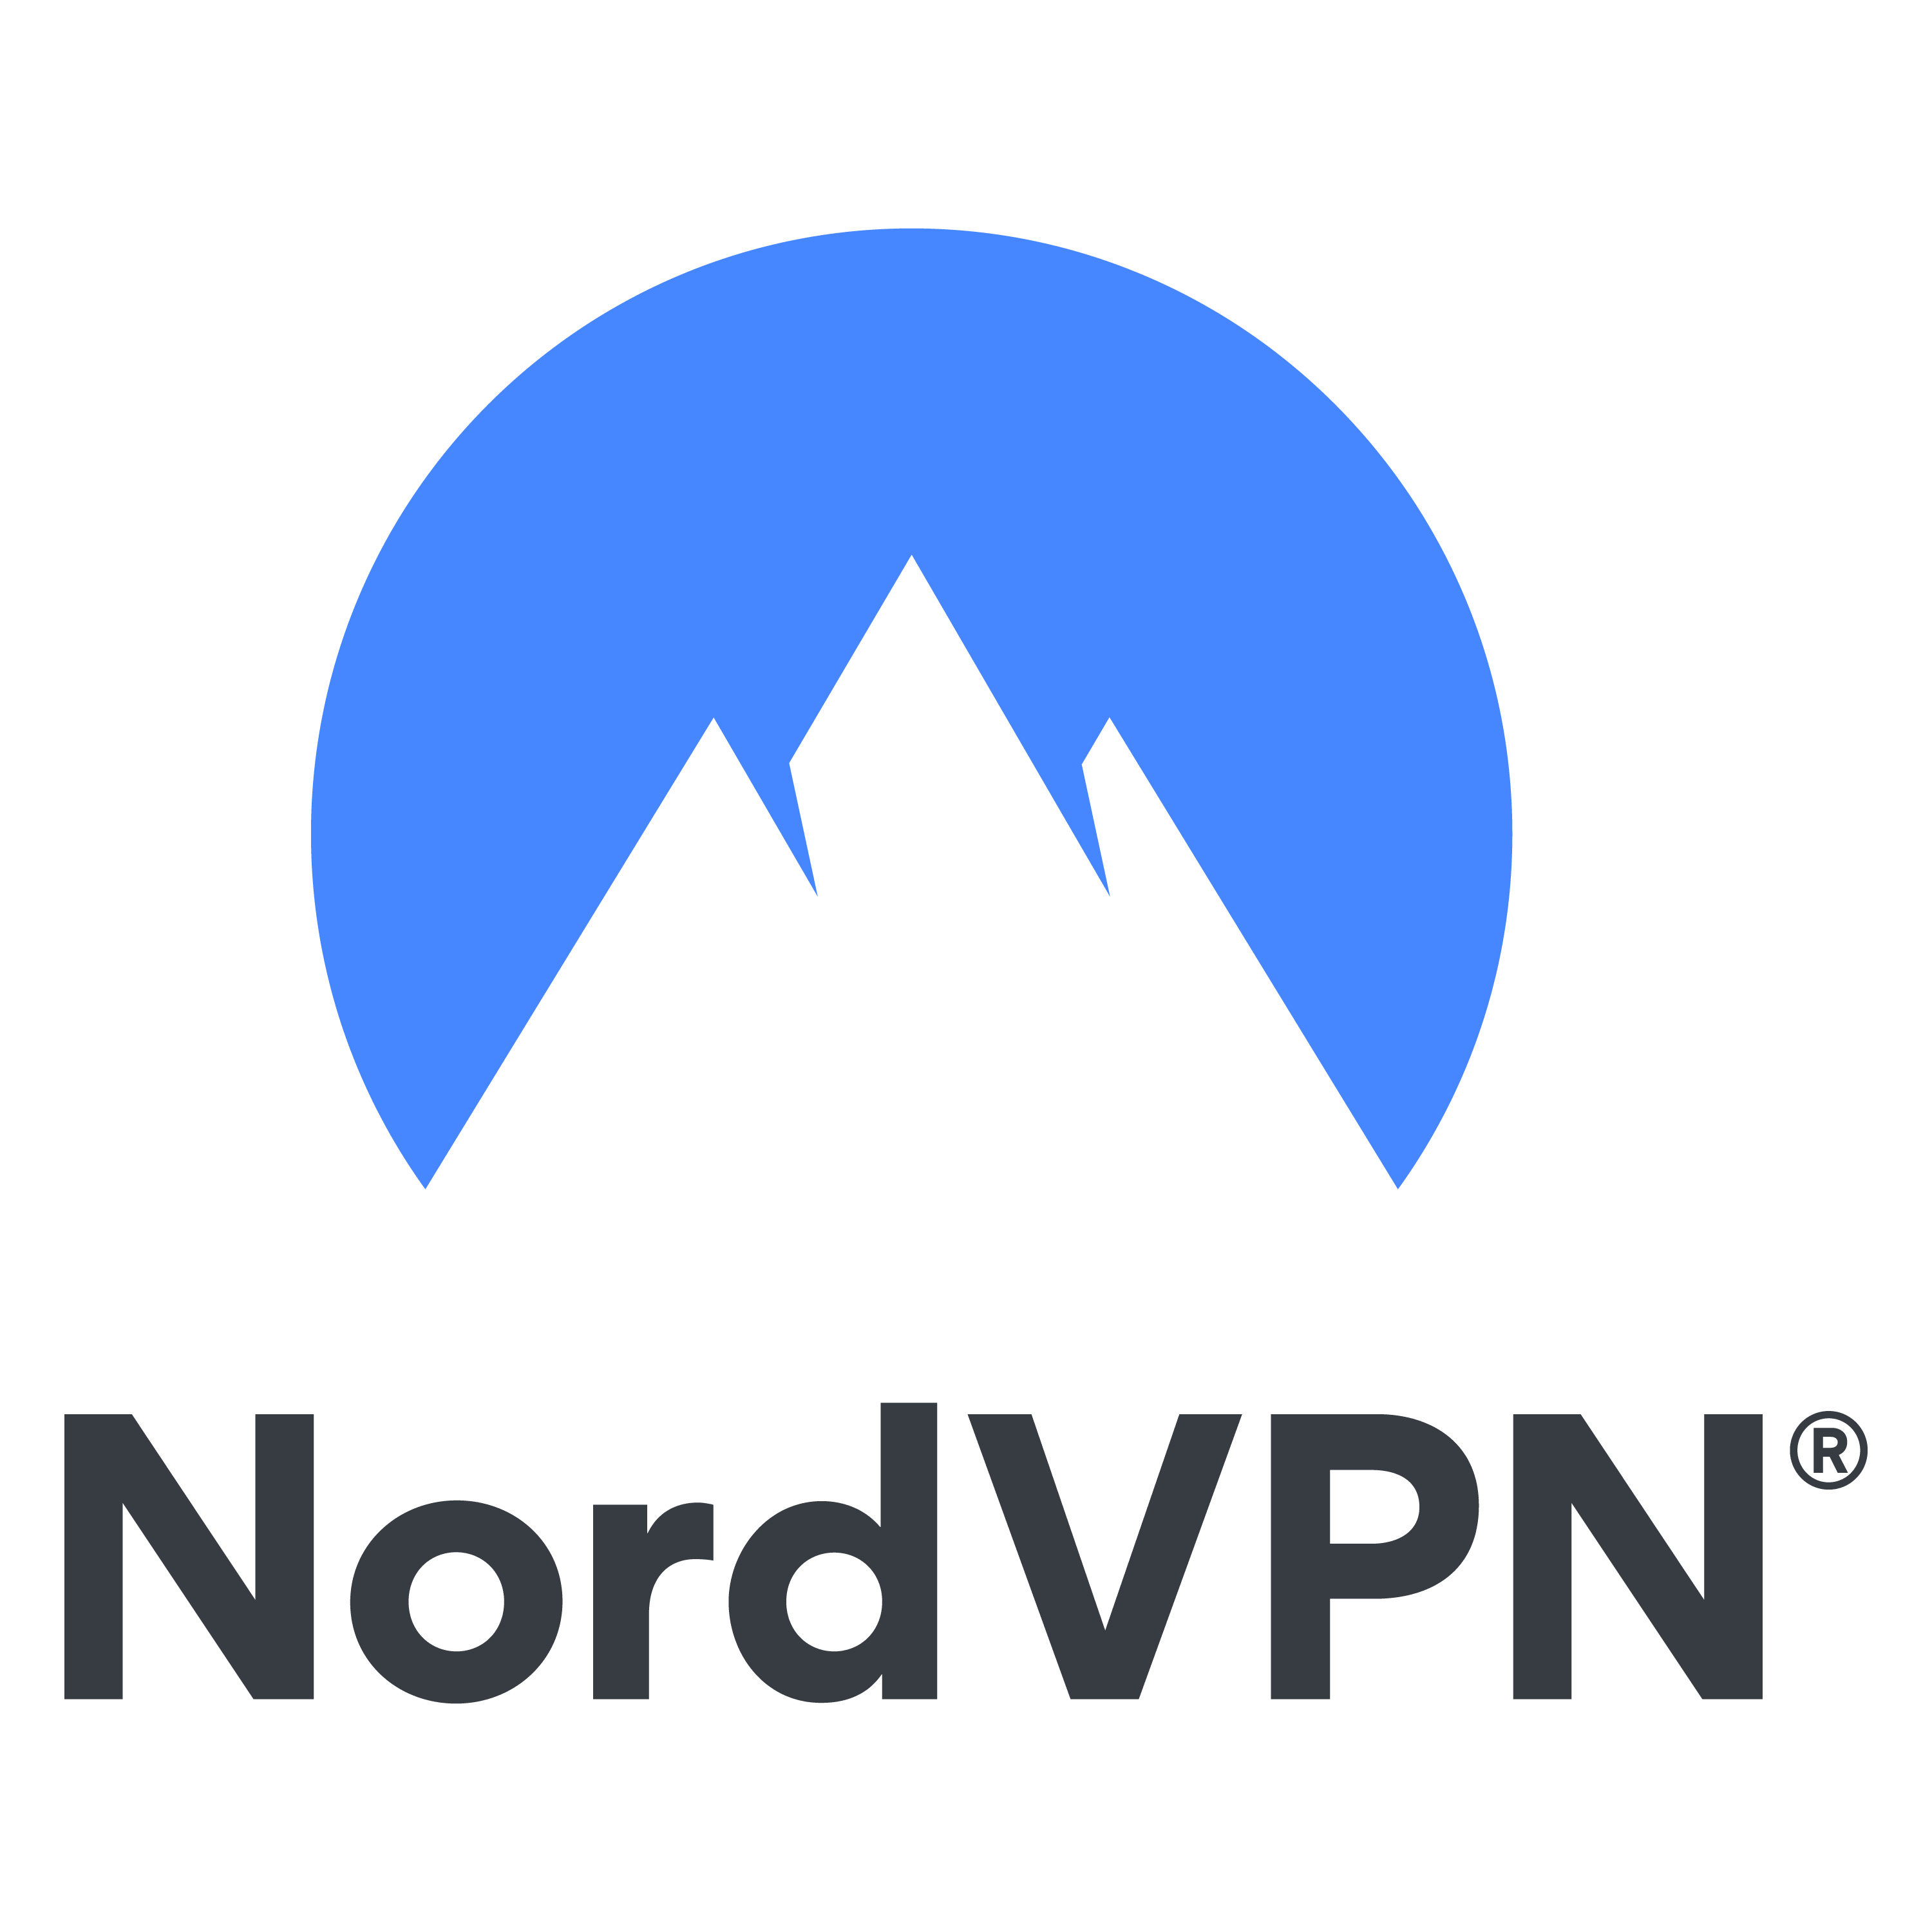 Buy 🔥 NordVPN Nord - from 6 months to 4 years!(Best price) and download